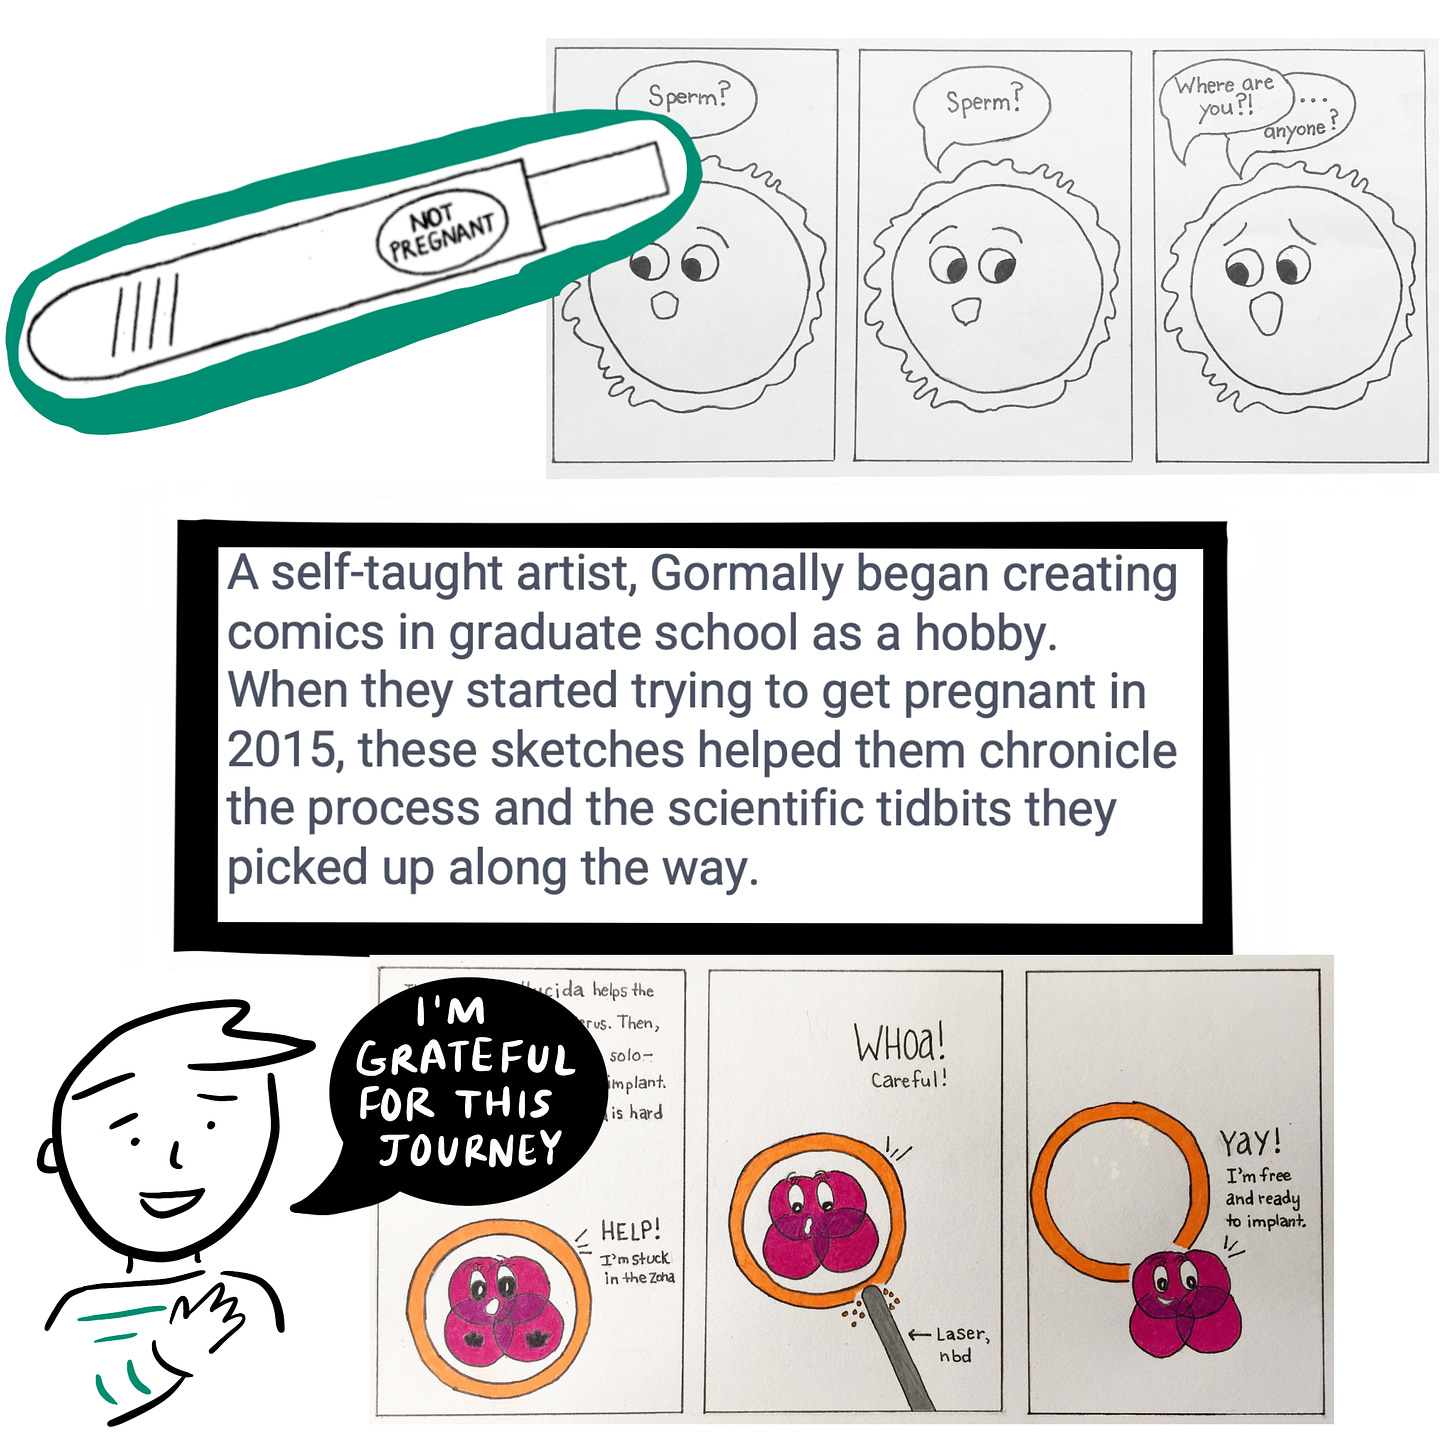  A “Not pregnant” pregnancy test. An egg saying “sperm? Sperm? Where are you? Anyone…?” A self-taught artist, Gormally began creating comics in graduate school as a hobby. When they started trying to get pregnant in 2015, these sketches helped them chronicle the process and the scientific tidbits they picked up along the way. A comic of an embryo. Cartoonist saying “I’m grateful for this journey.”